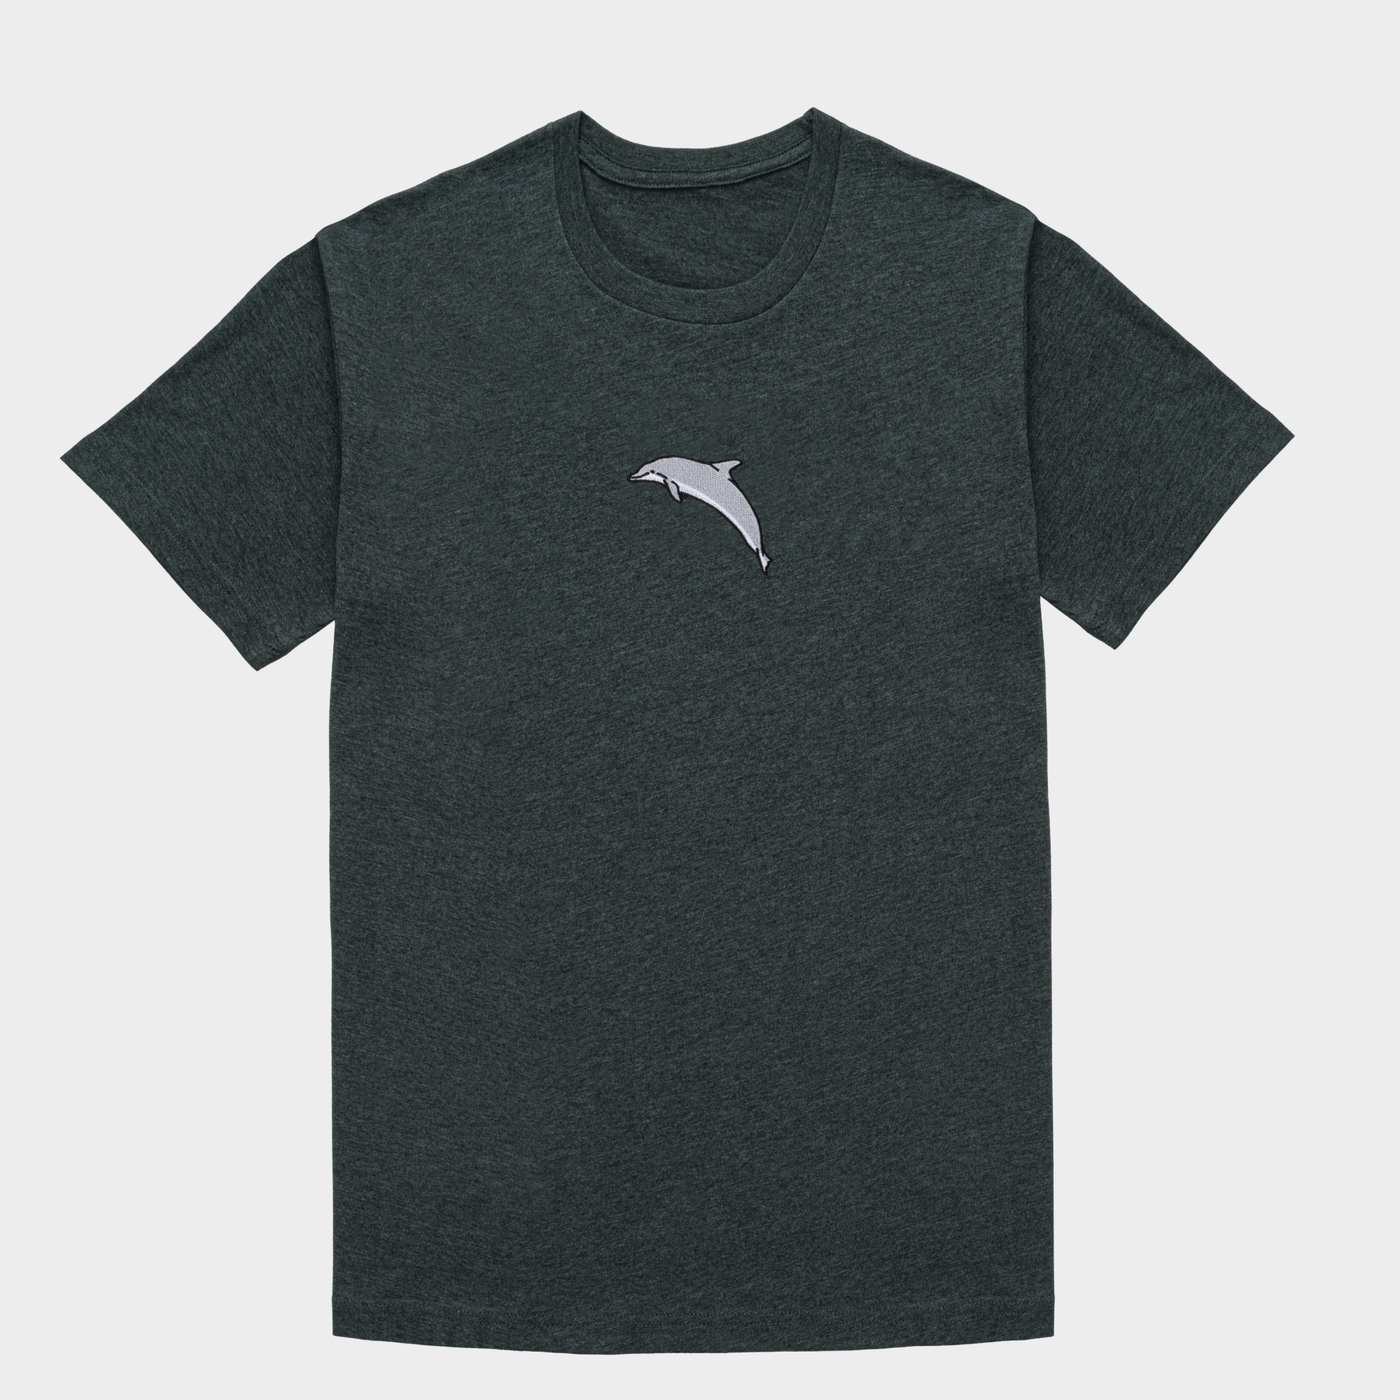 Bobby's Planet Men's Embroidered Dolphin T-Shirt from Seven Seas Fish Animals Collection in Dark Grey Heather Color#color_dark-grey-heather